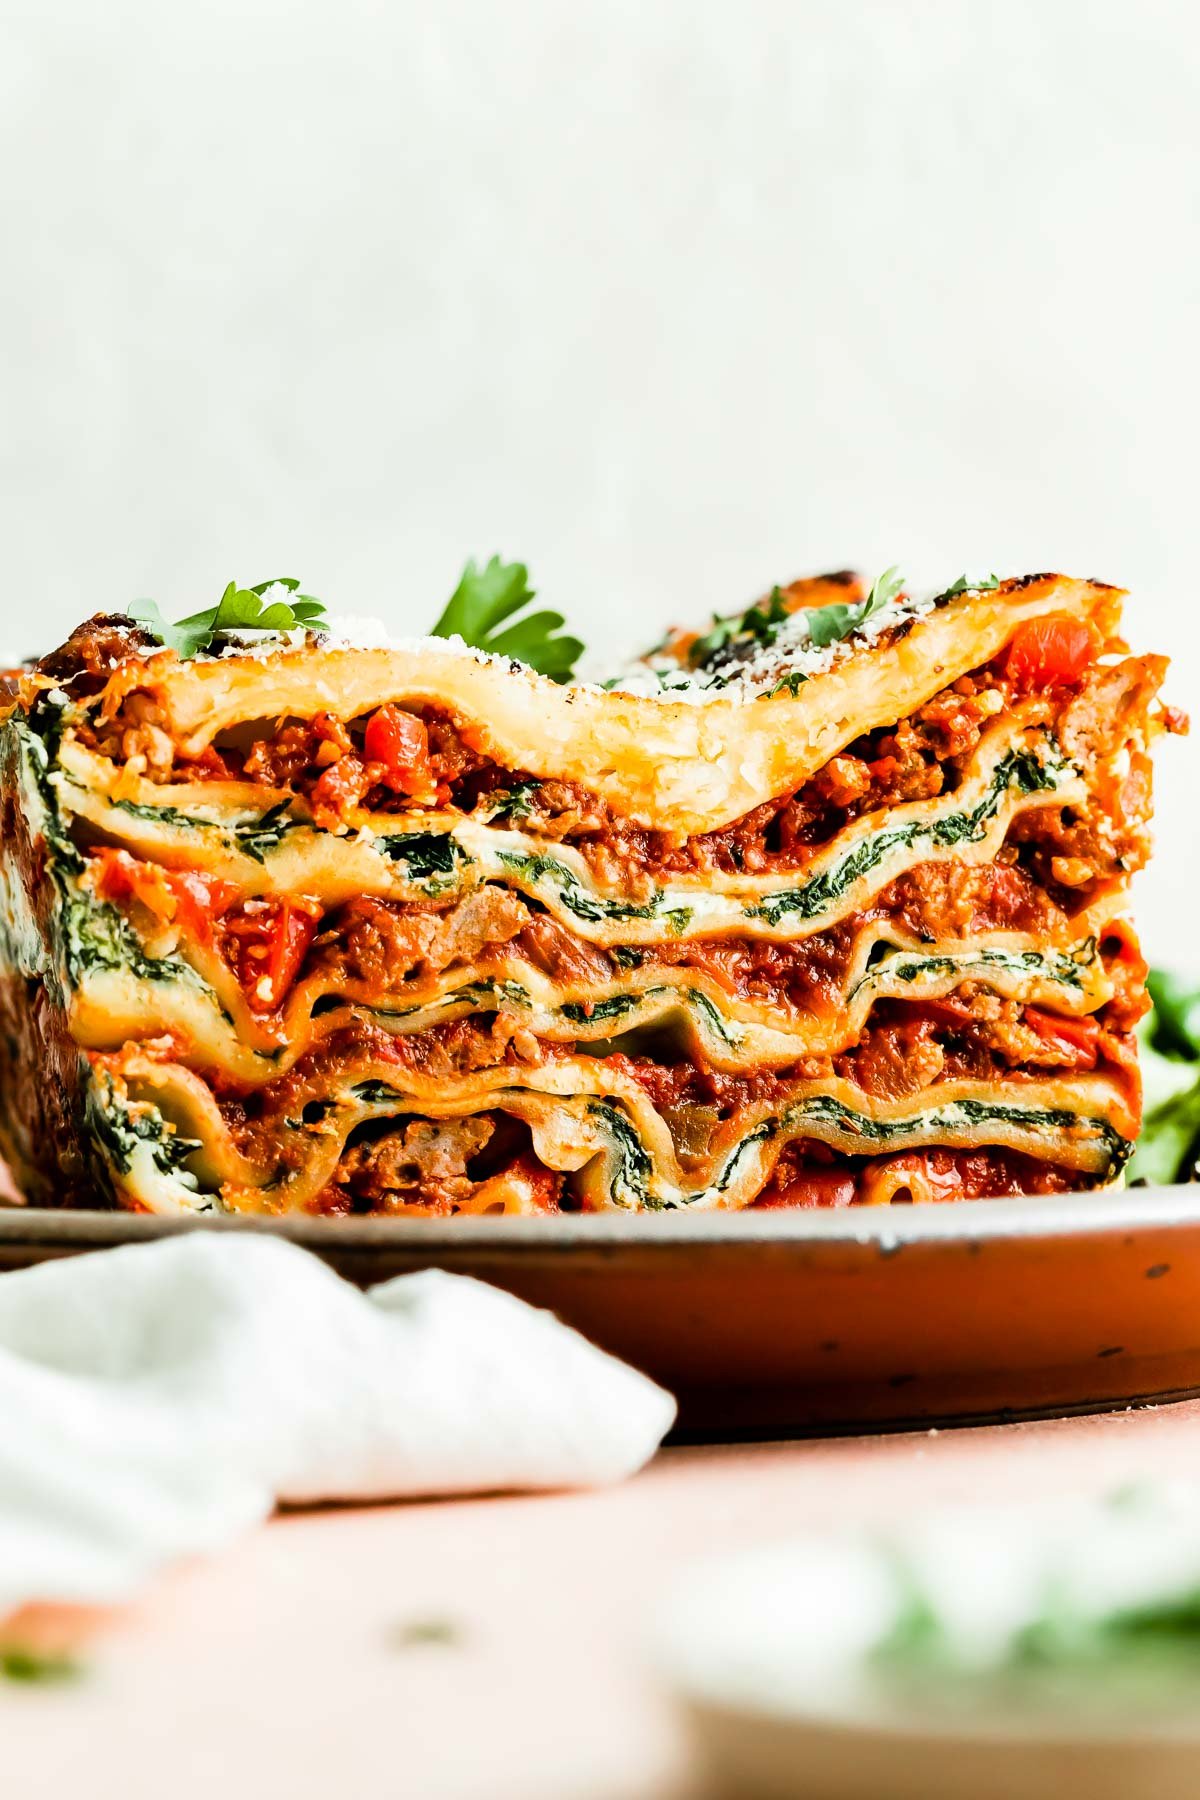 https://playswellwithbutter.com/wp-content/uploads/2023/02/Lasagna-for-Two-Small-Batch-Lasagna-Recipe-20.jpg